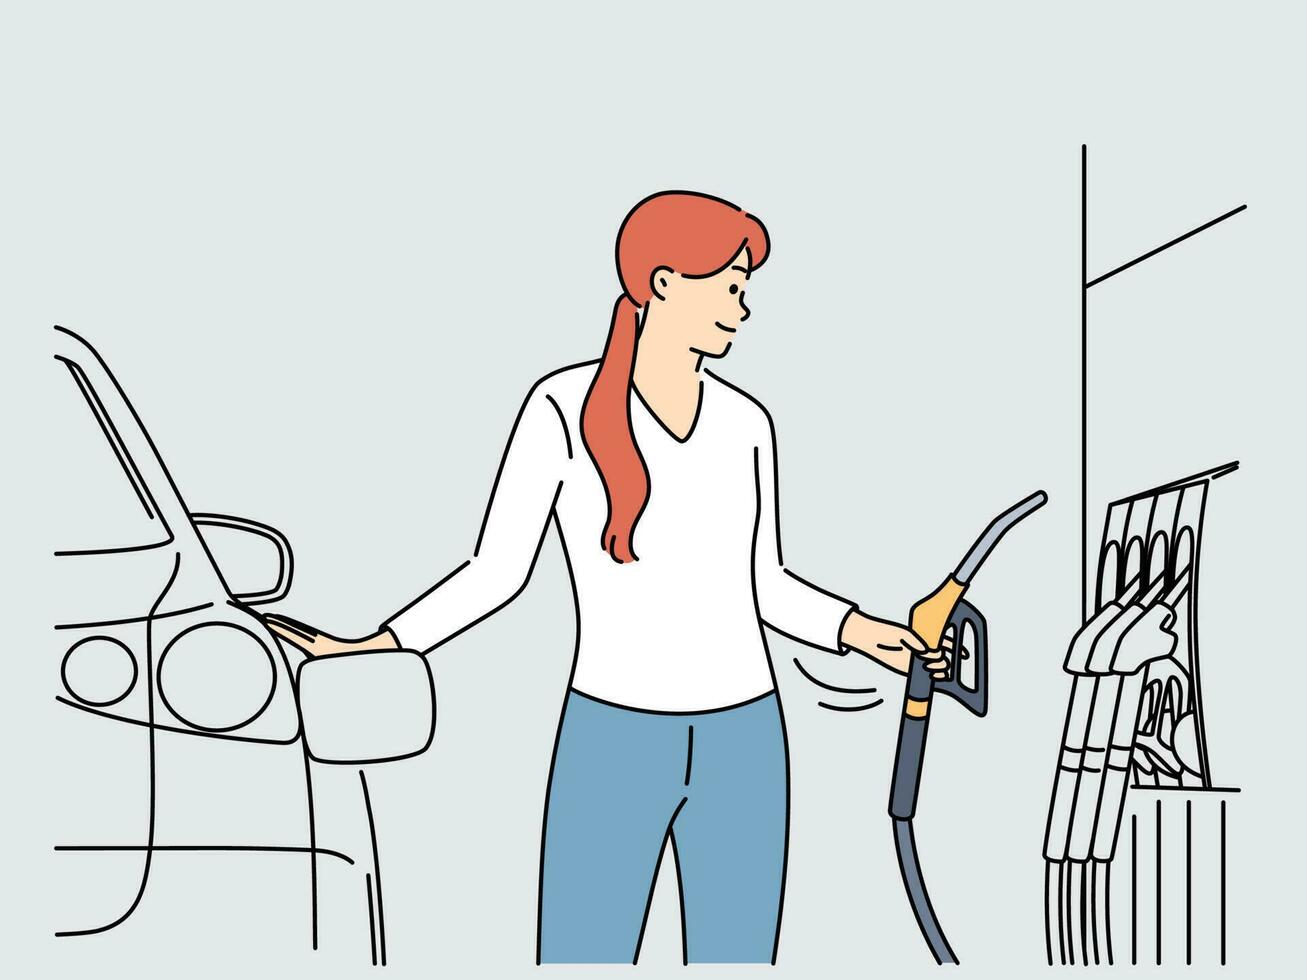 Young woman refuel car at gas station. Smiling female fuel automobile with petroleum. Vector illustration.